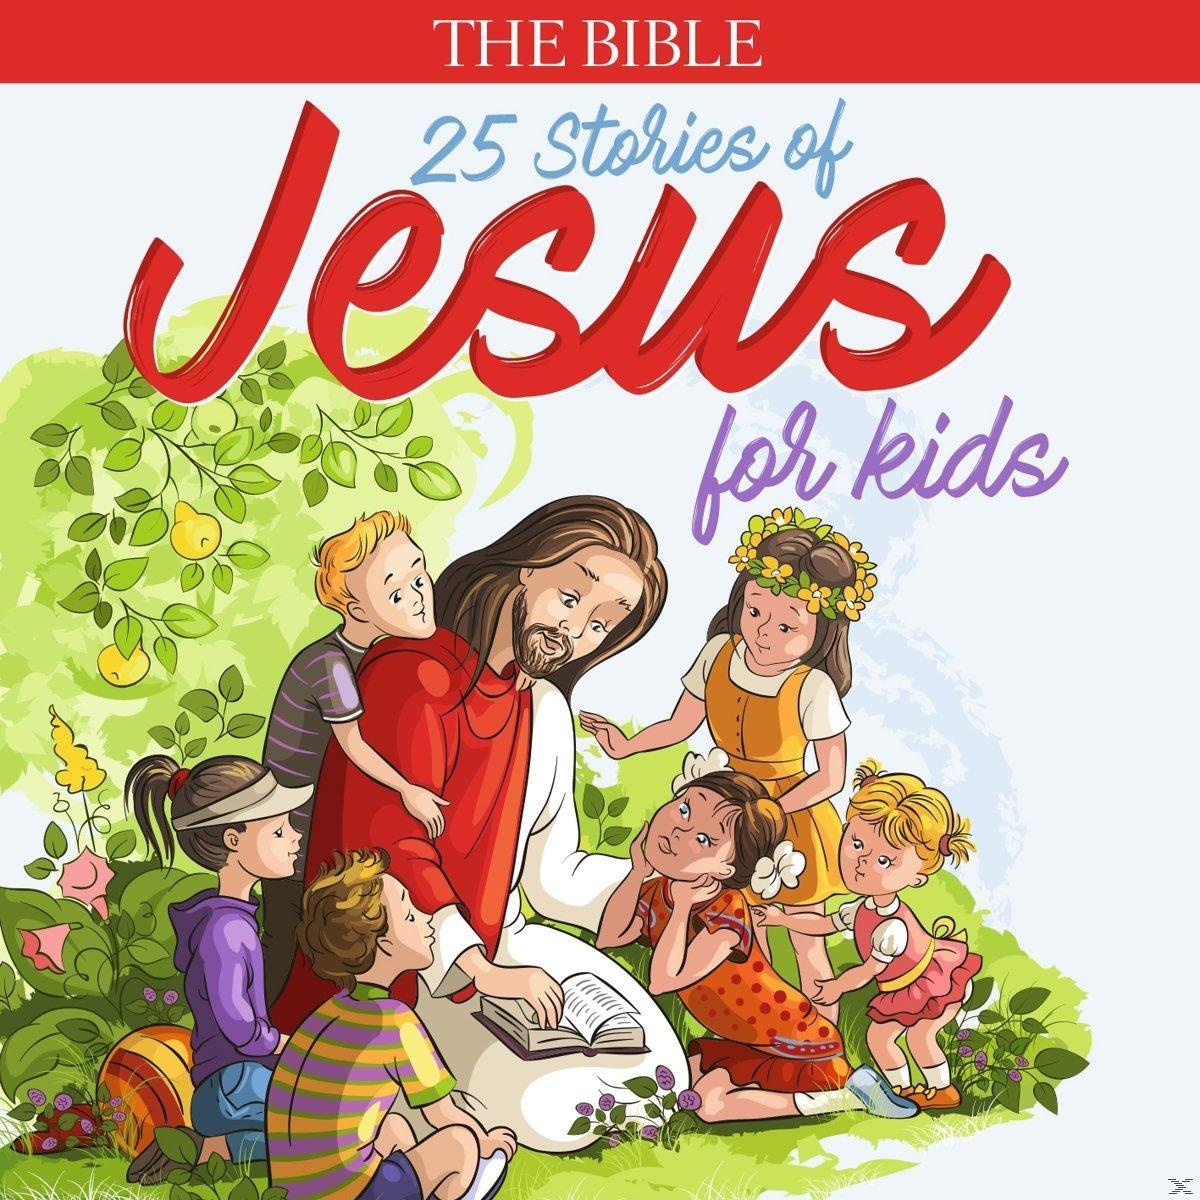 VARIOUS Stories Jesus For - - Of The Kinds (CD) Bible: